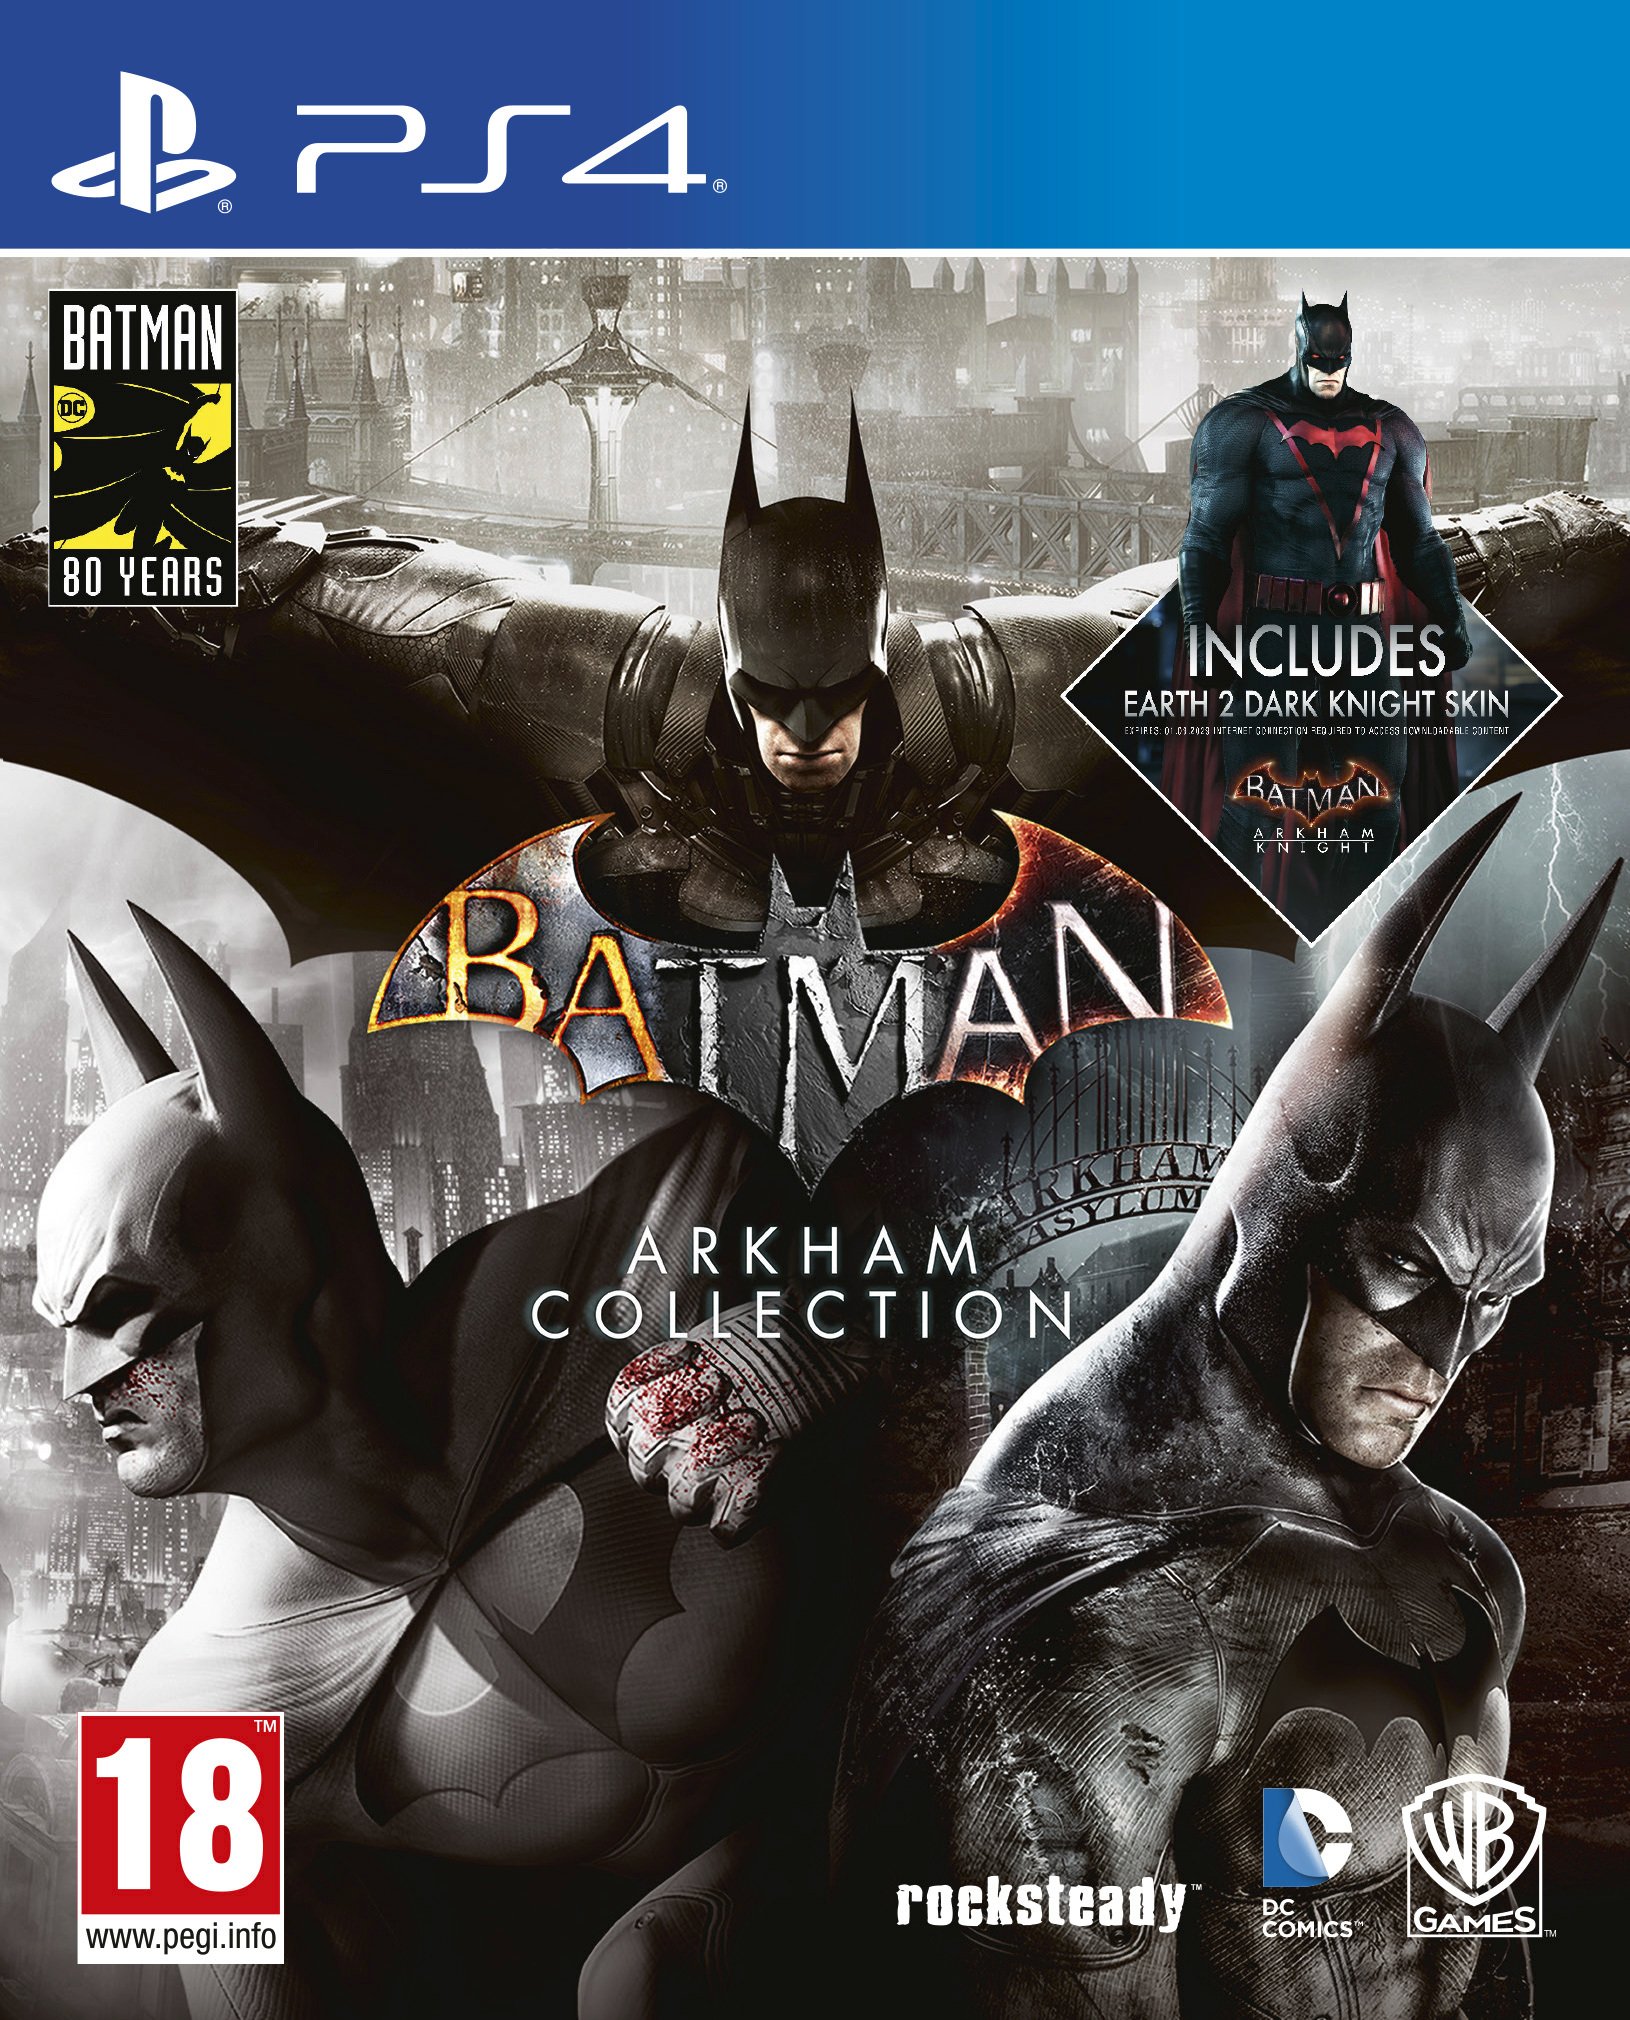 Buy Batman Arkham Collection - PlayStation 4 - English - Complete Collection